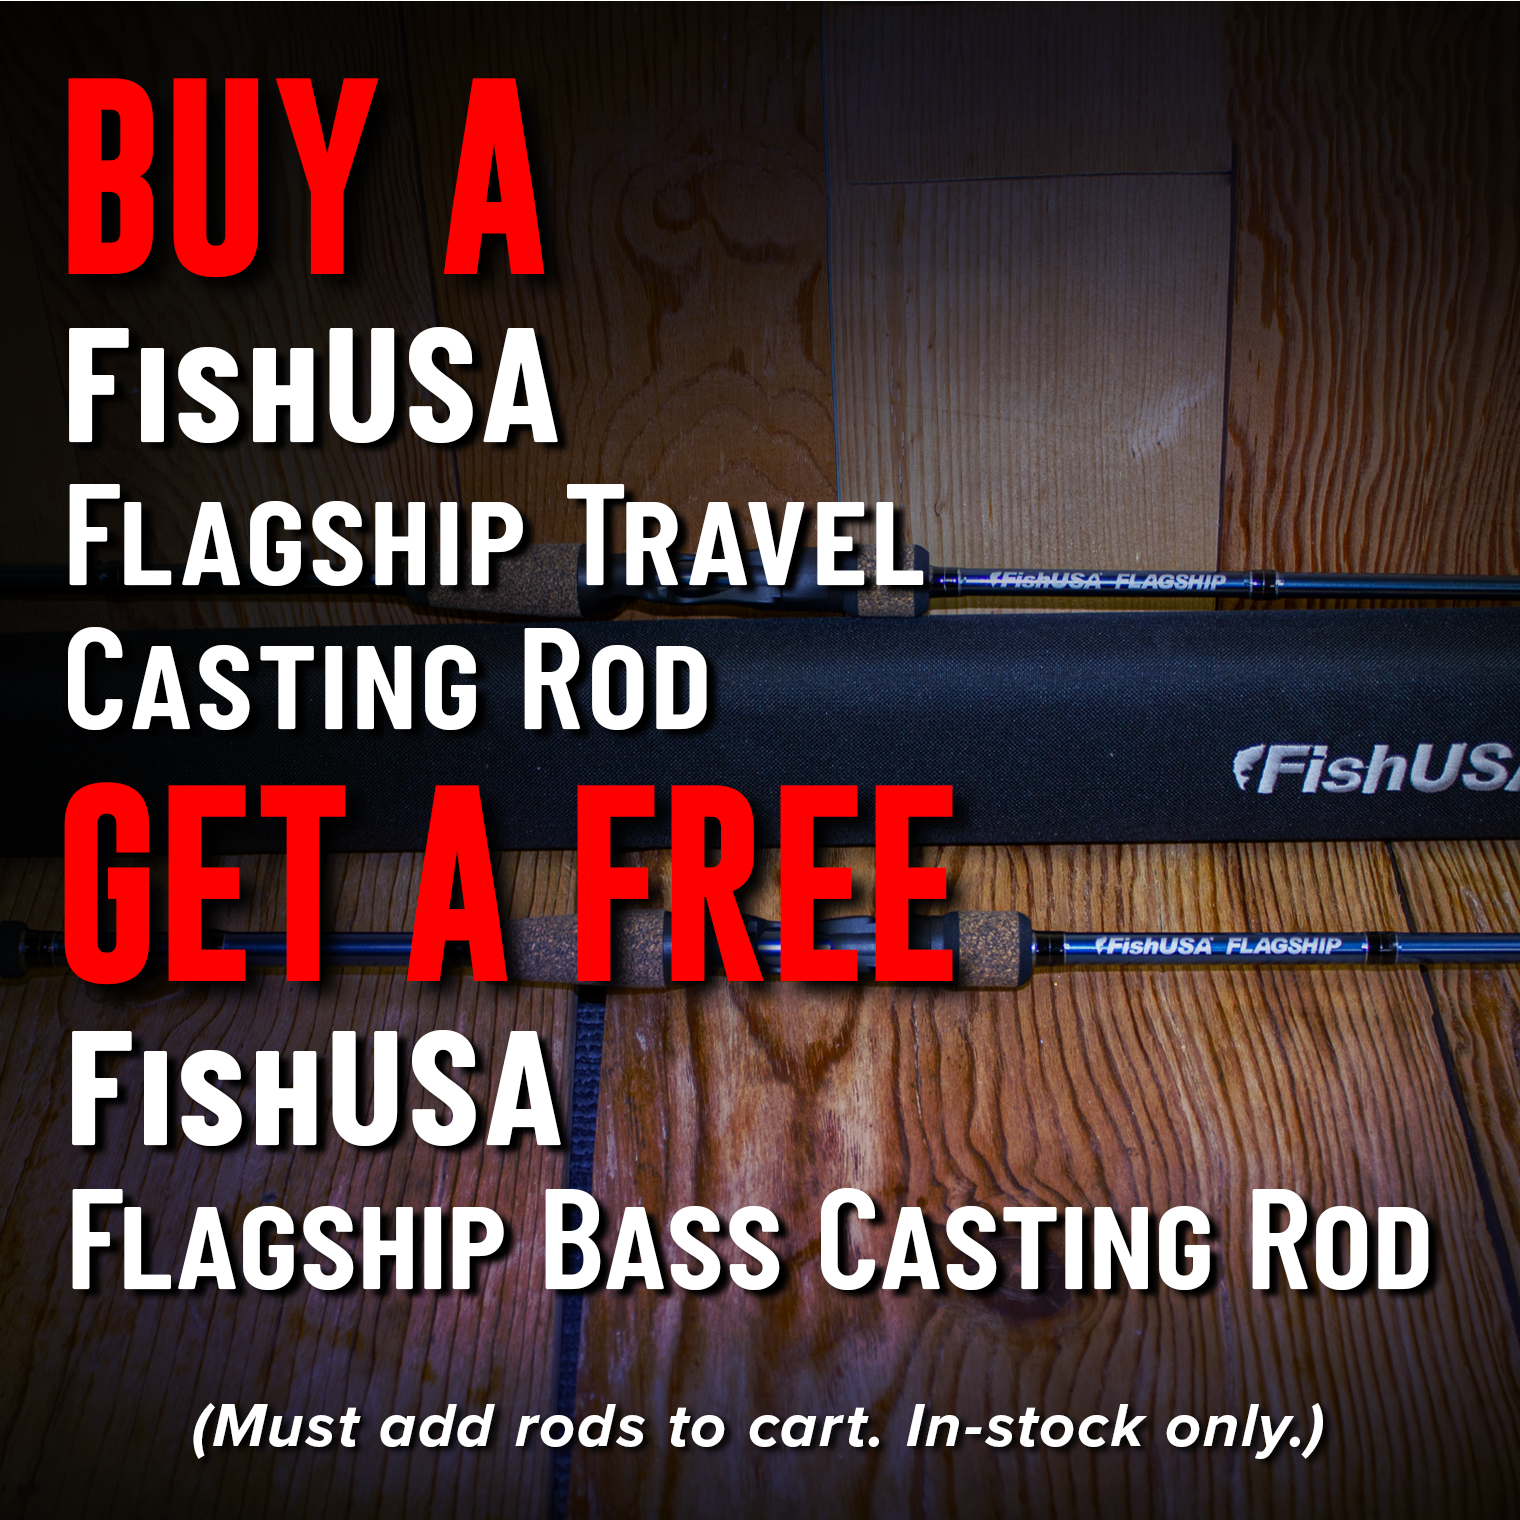 Buy a FishUSA Flagship Travel Casting Rod Get a Free FishUSA Bass Casting Rod (Must add rods to cart. In-stock only.)